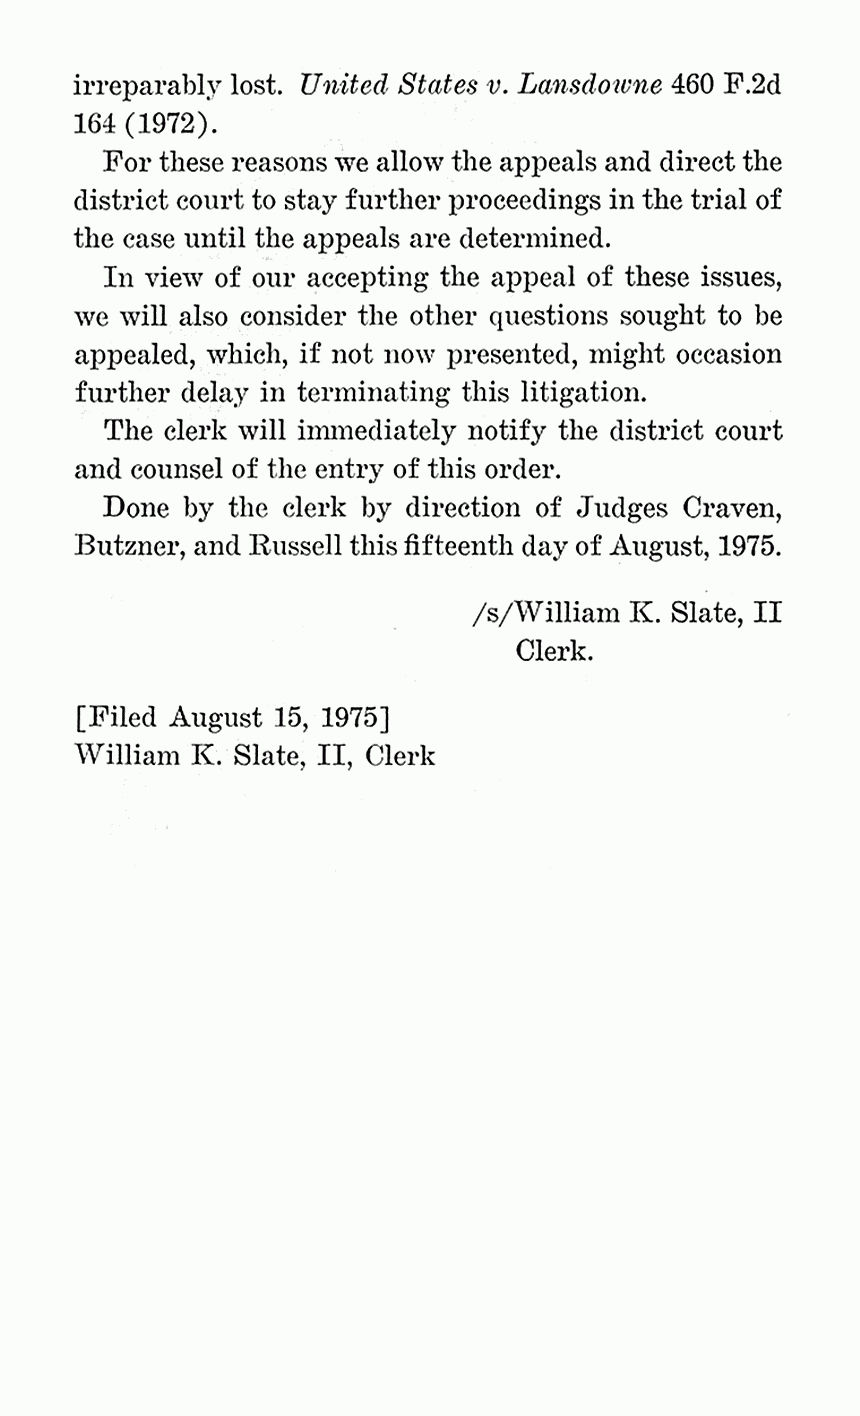 August 15, 1975: U. S. Court of Appeals for the Fourth Circuit; Stay Order and Order Allowing Appeal re: Double Jeopardy and Speedy Trial, p. 2 of 2